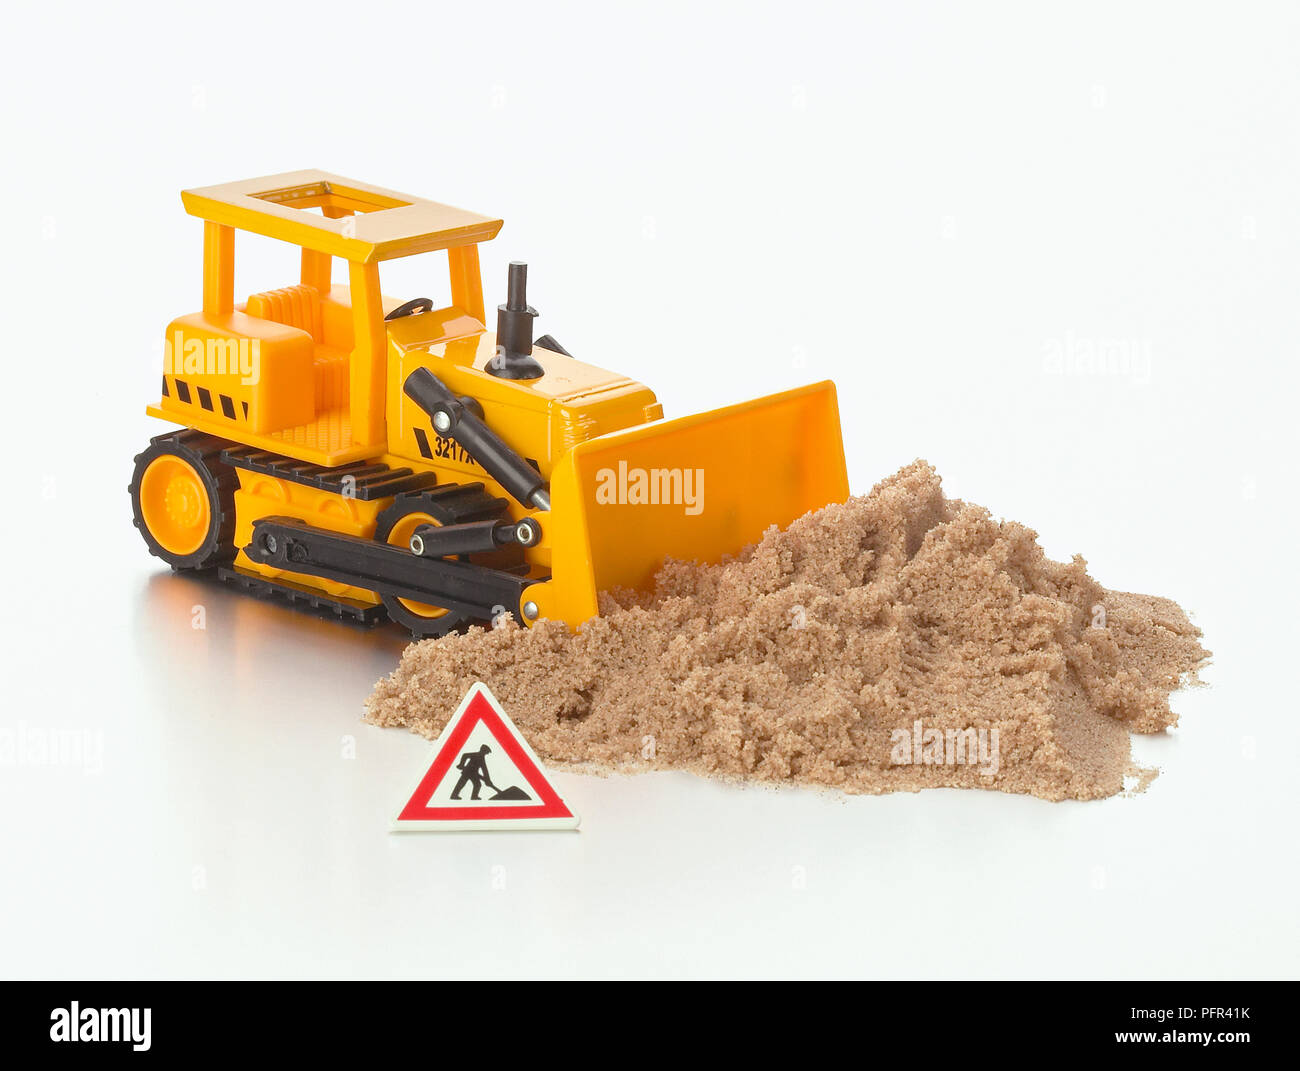 Toy bulldozer, pile of sand, and construction site warning sign Stock Photo